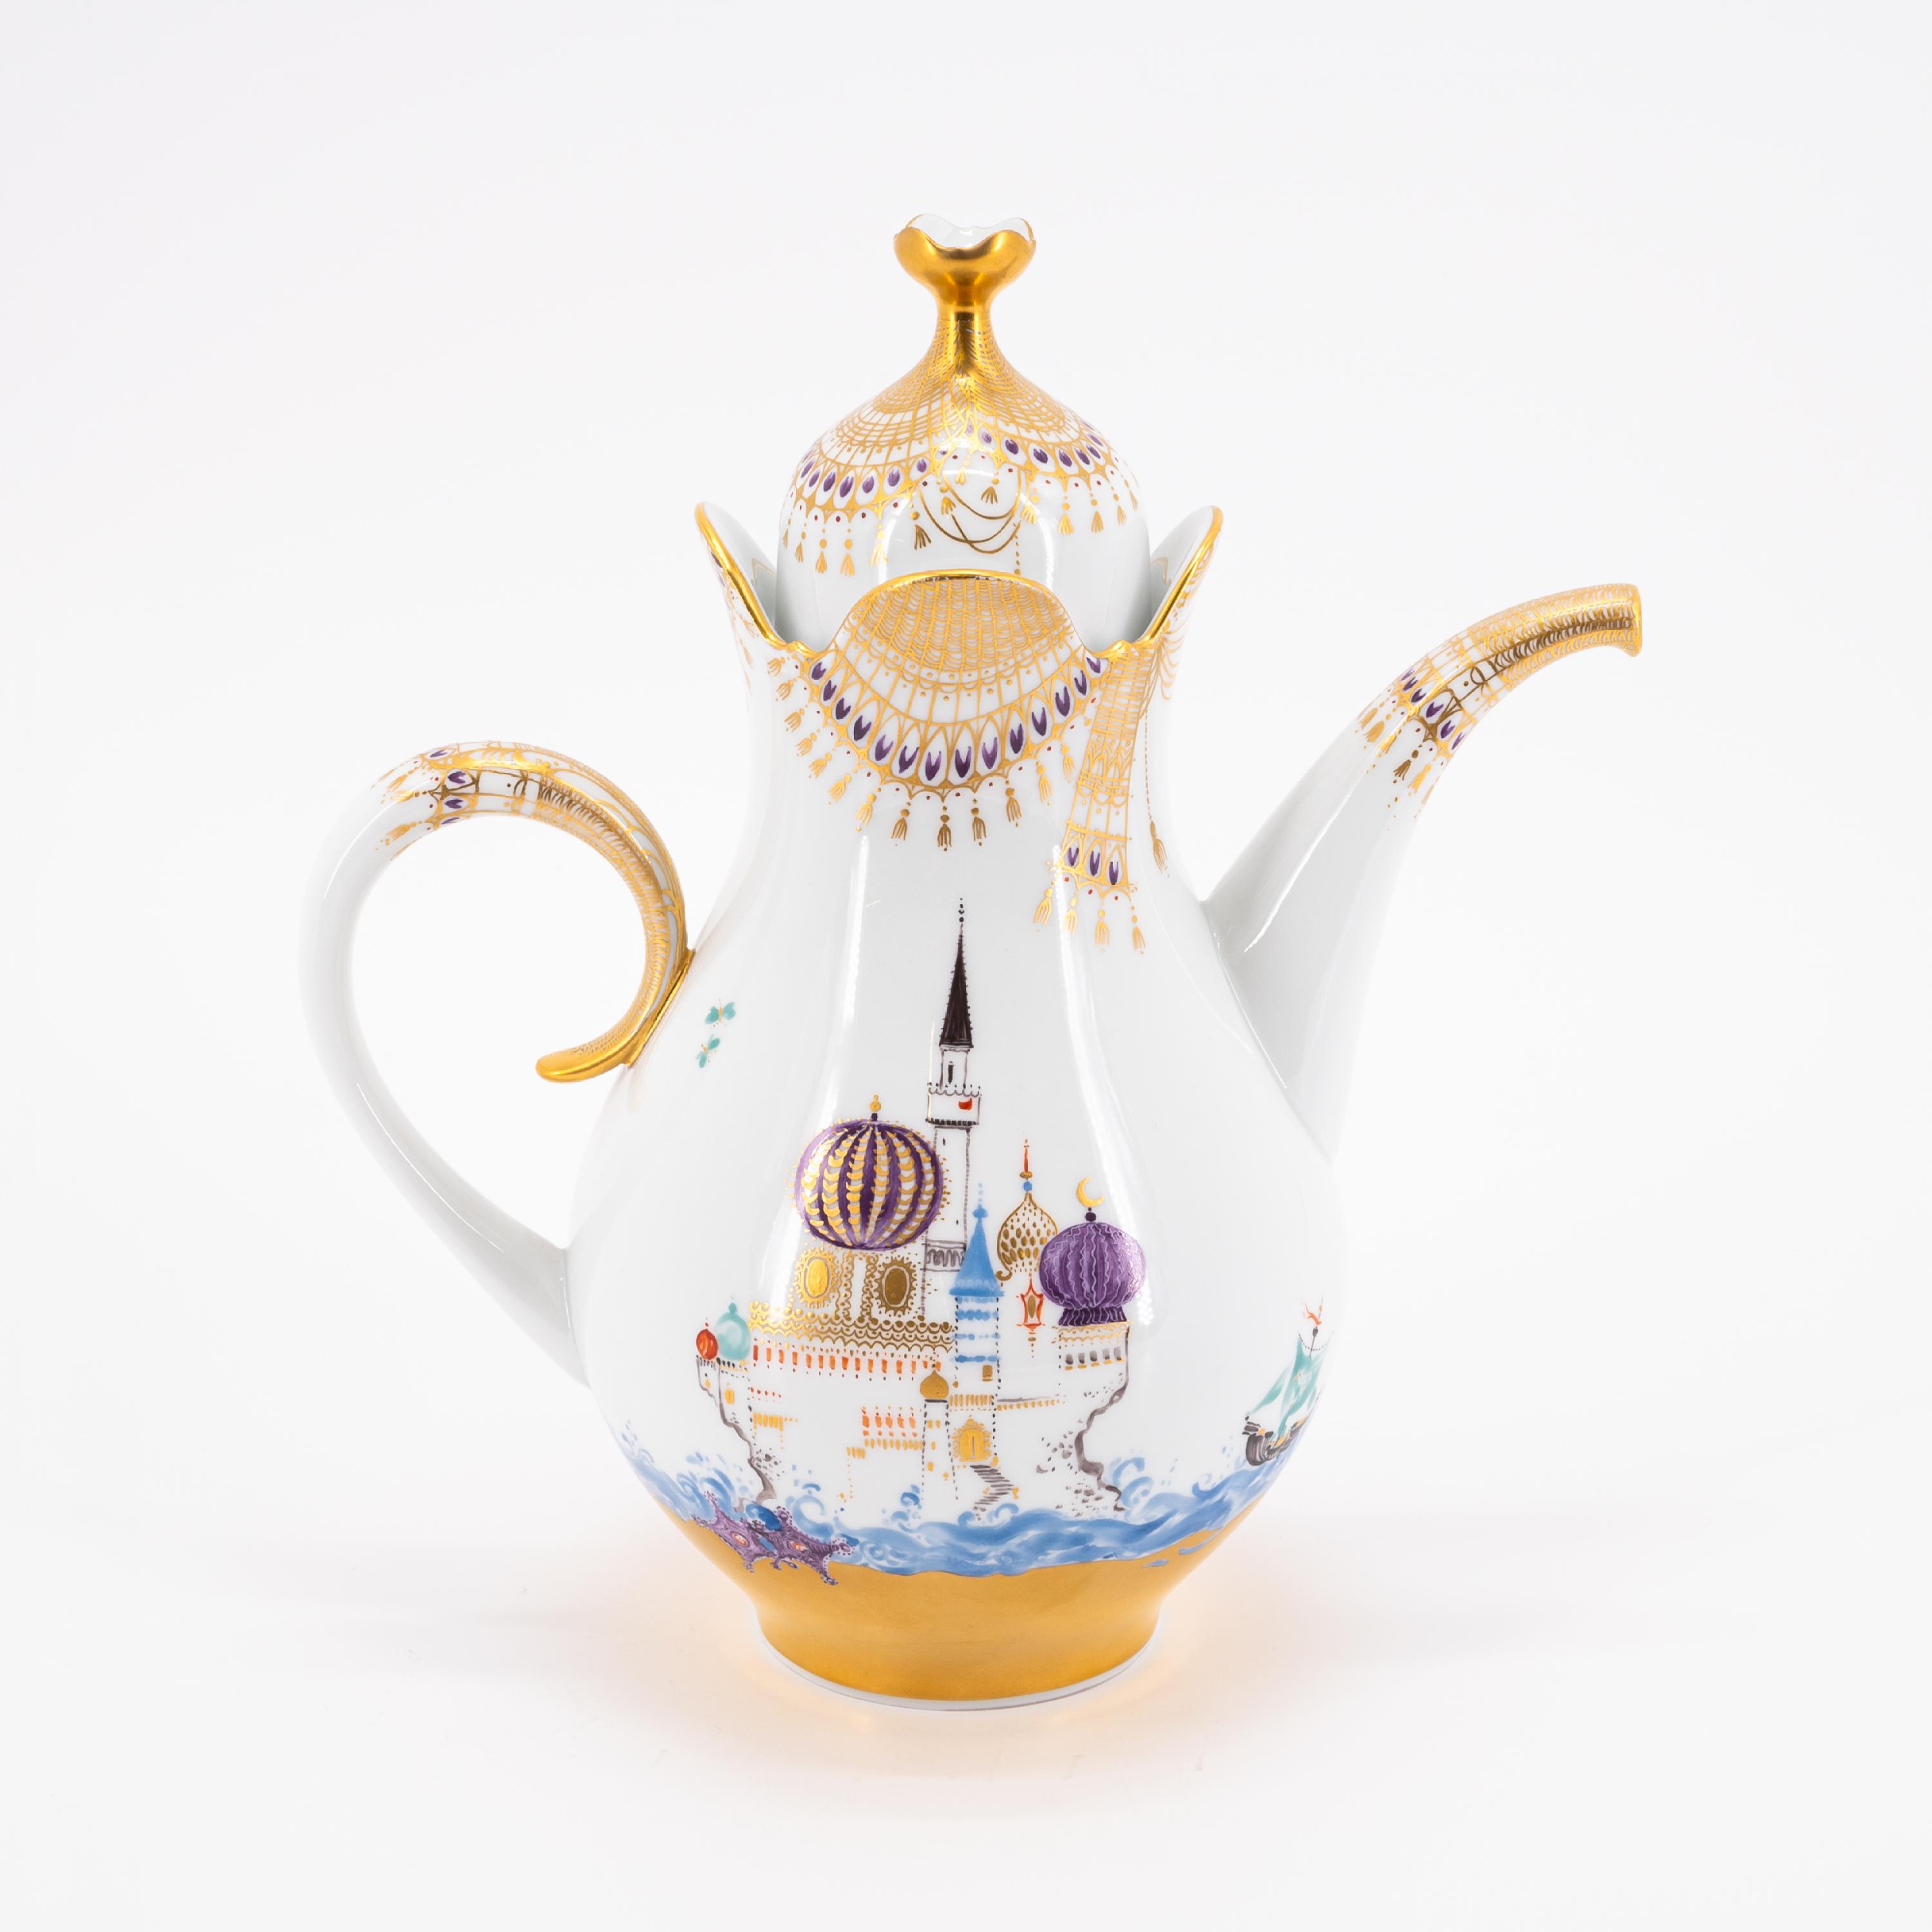 LARGE PORCELAIN COFFEE SERVICE WITH '1001 NIGHTS' DECOR FOR 12 PEOPLE - Image 3 of 19